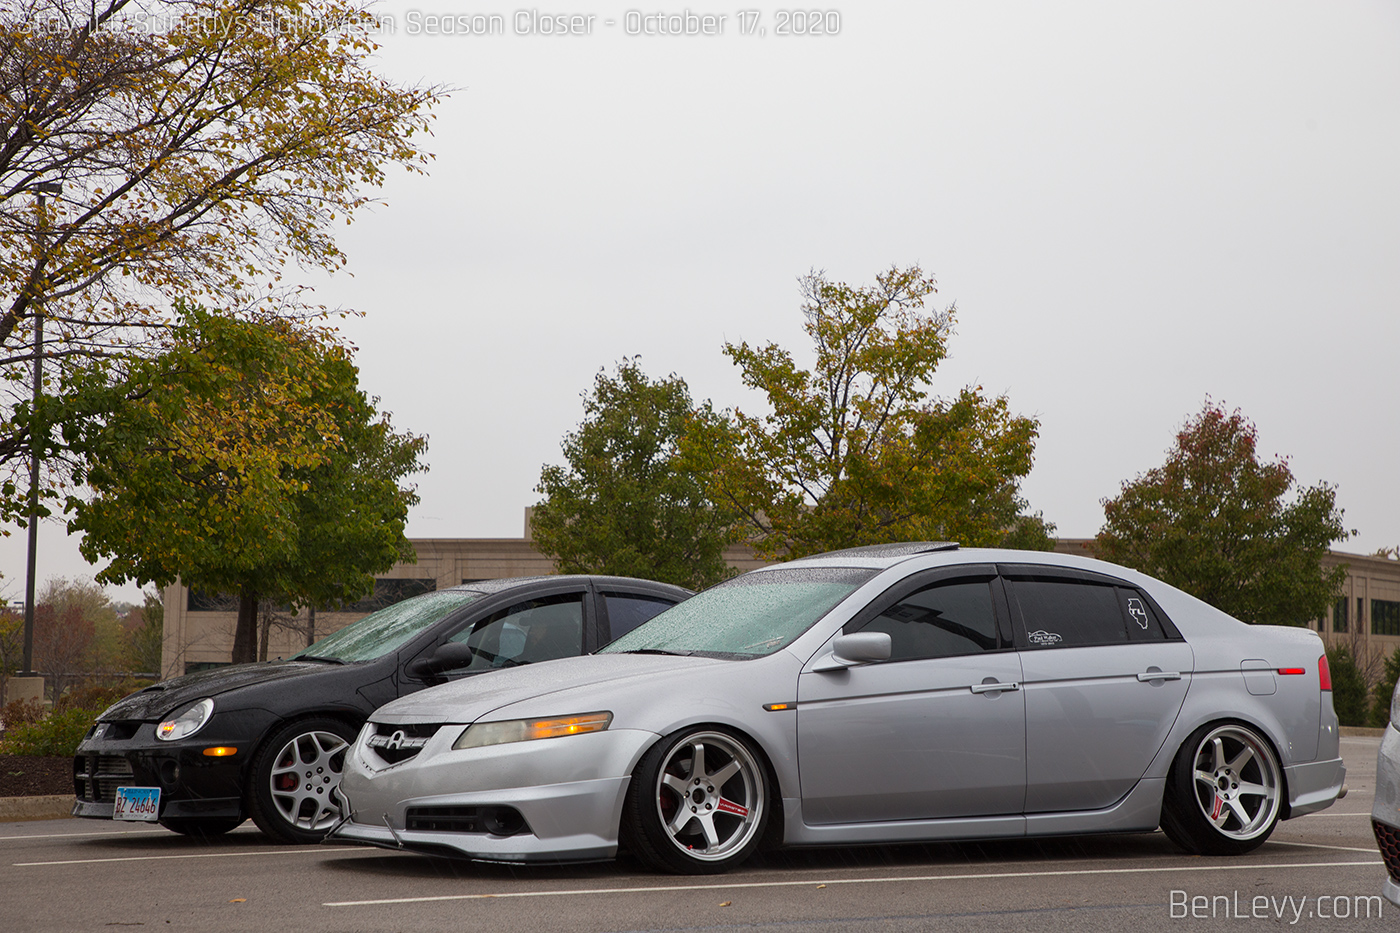 Dodge SRT-4 and Acura TL